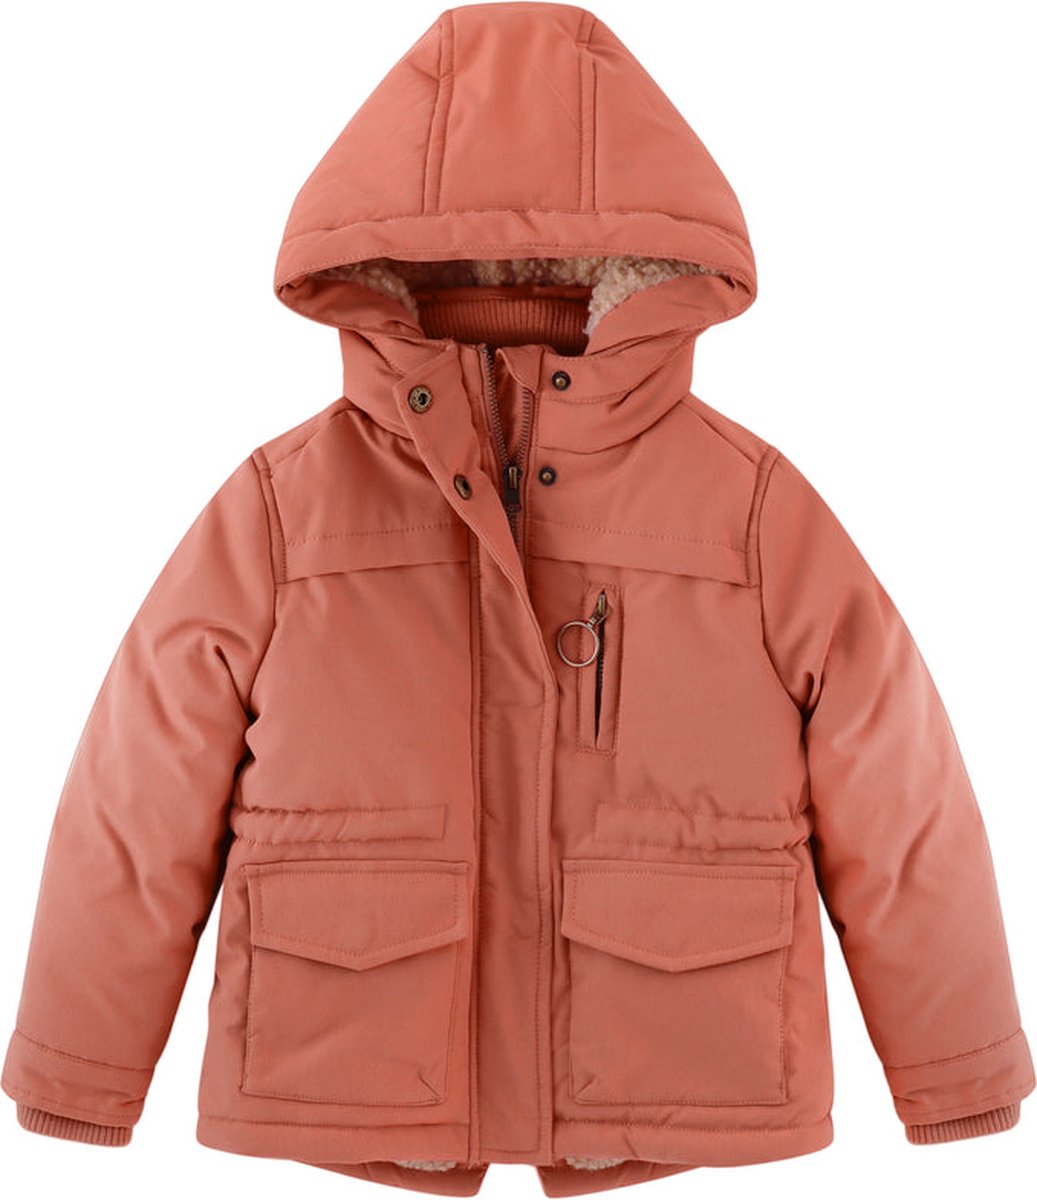 Your Wishes Oumi Parka Canyon Rose - Winterjas - Roze - Meisjes